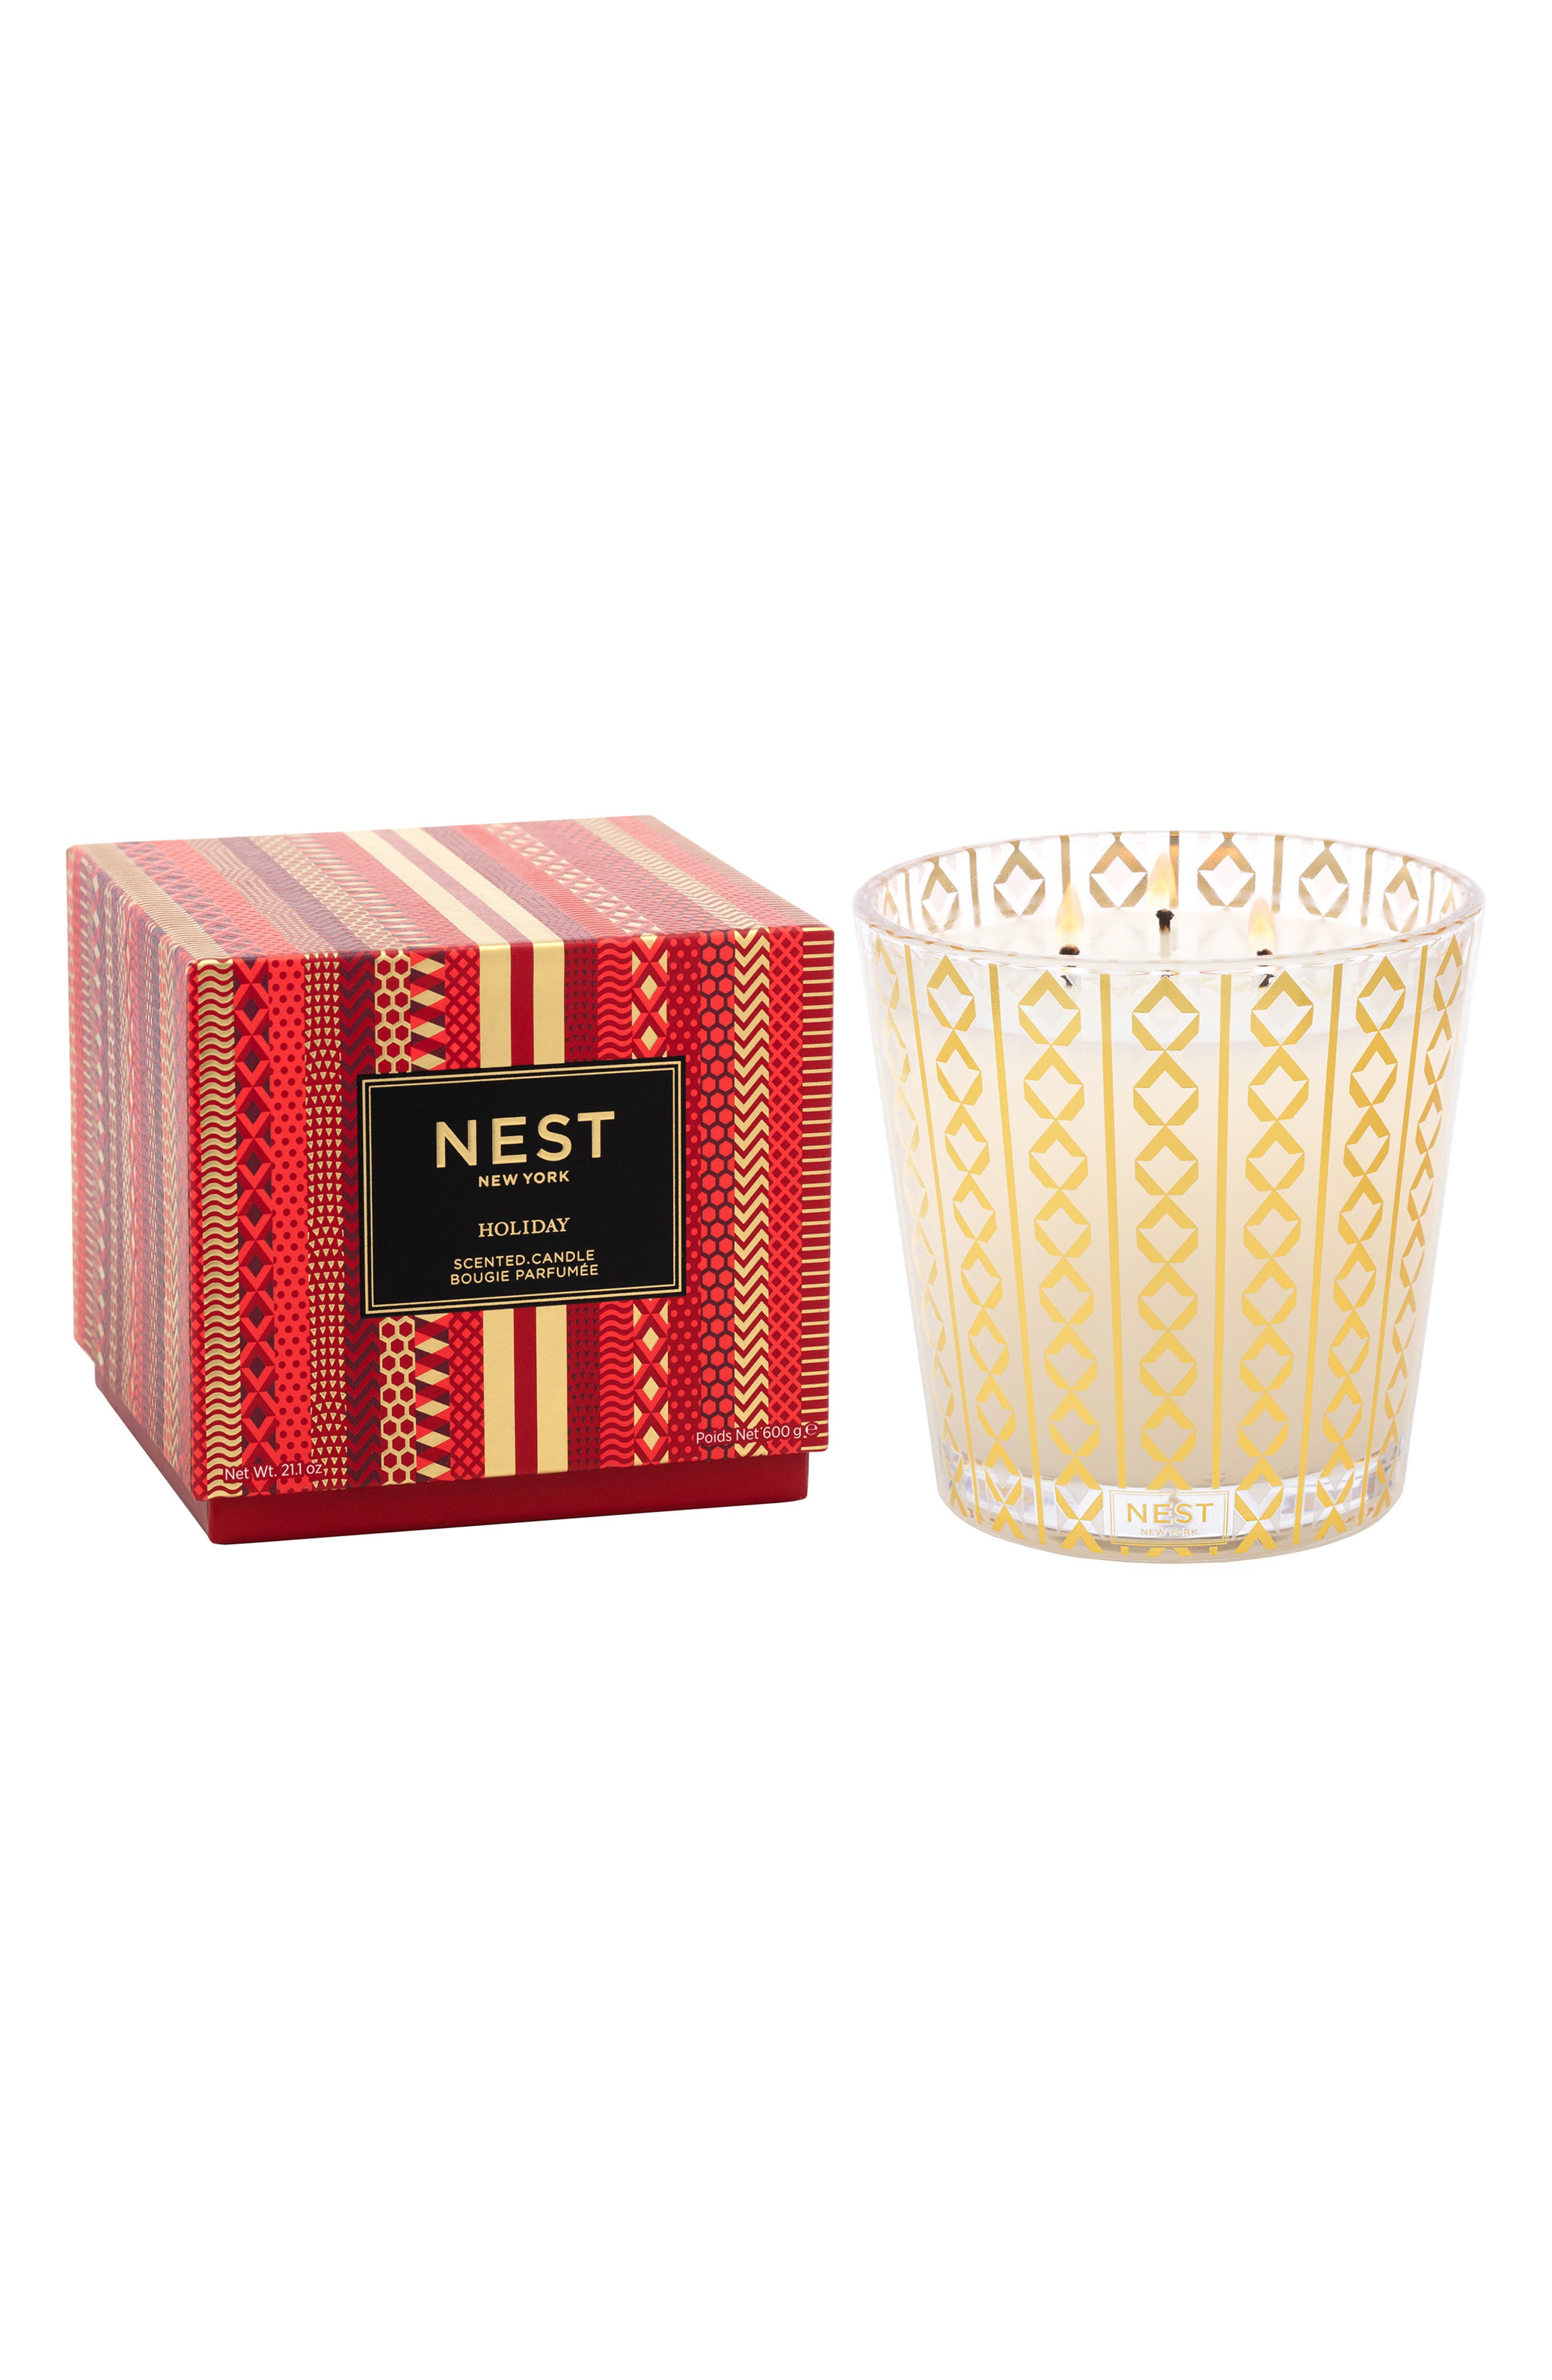 Nest Fragrances New York Holiday Scented Candle 2 oz Brand New 